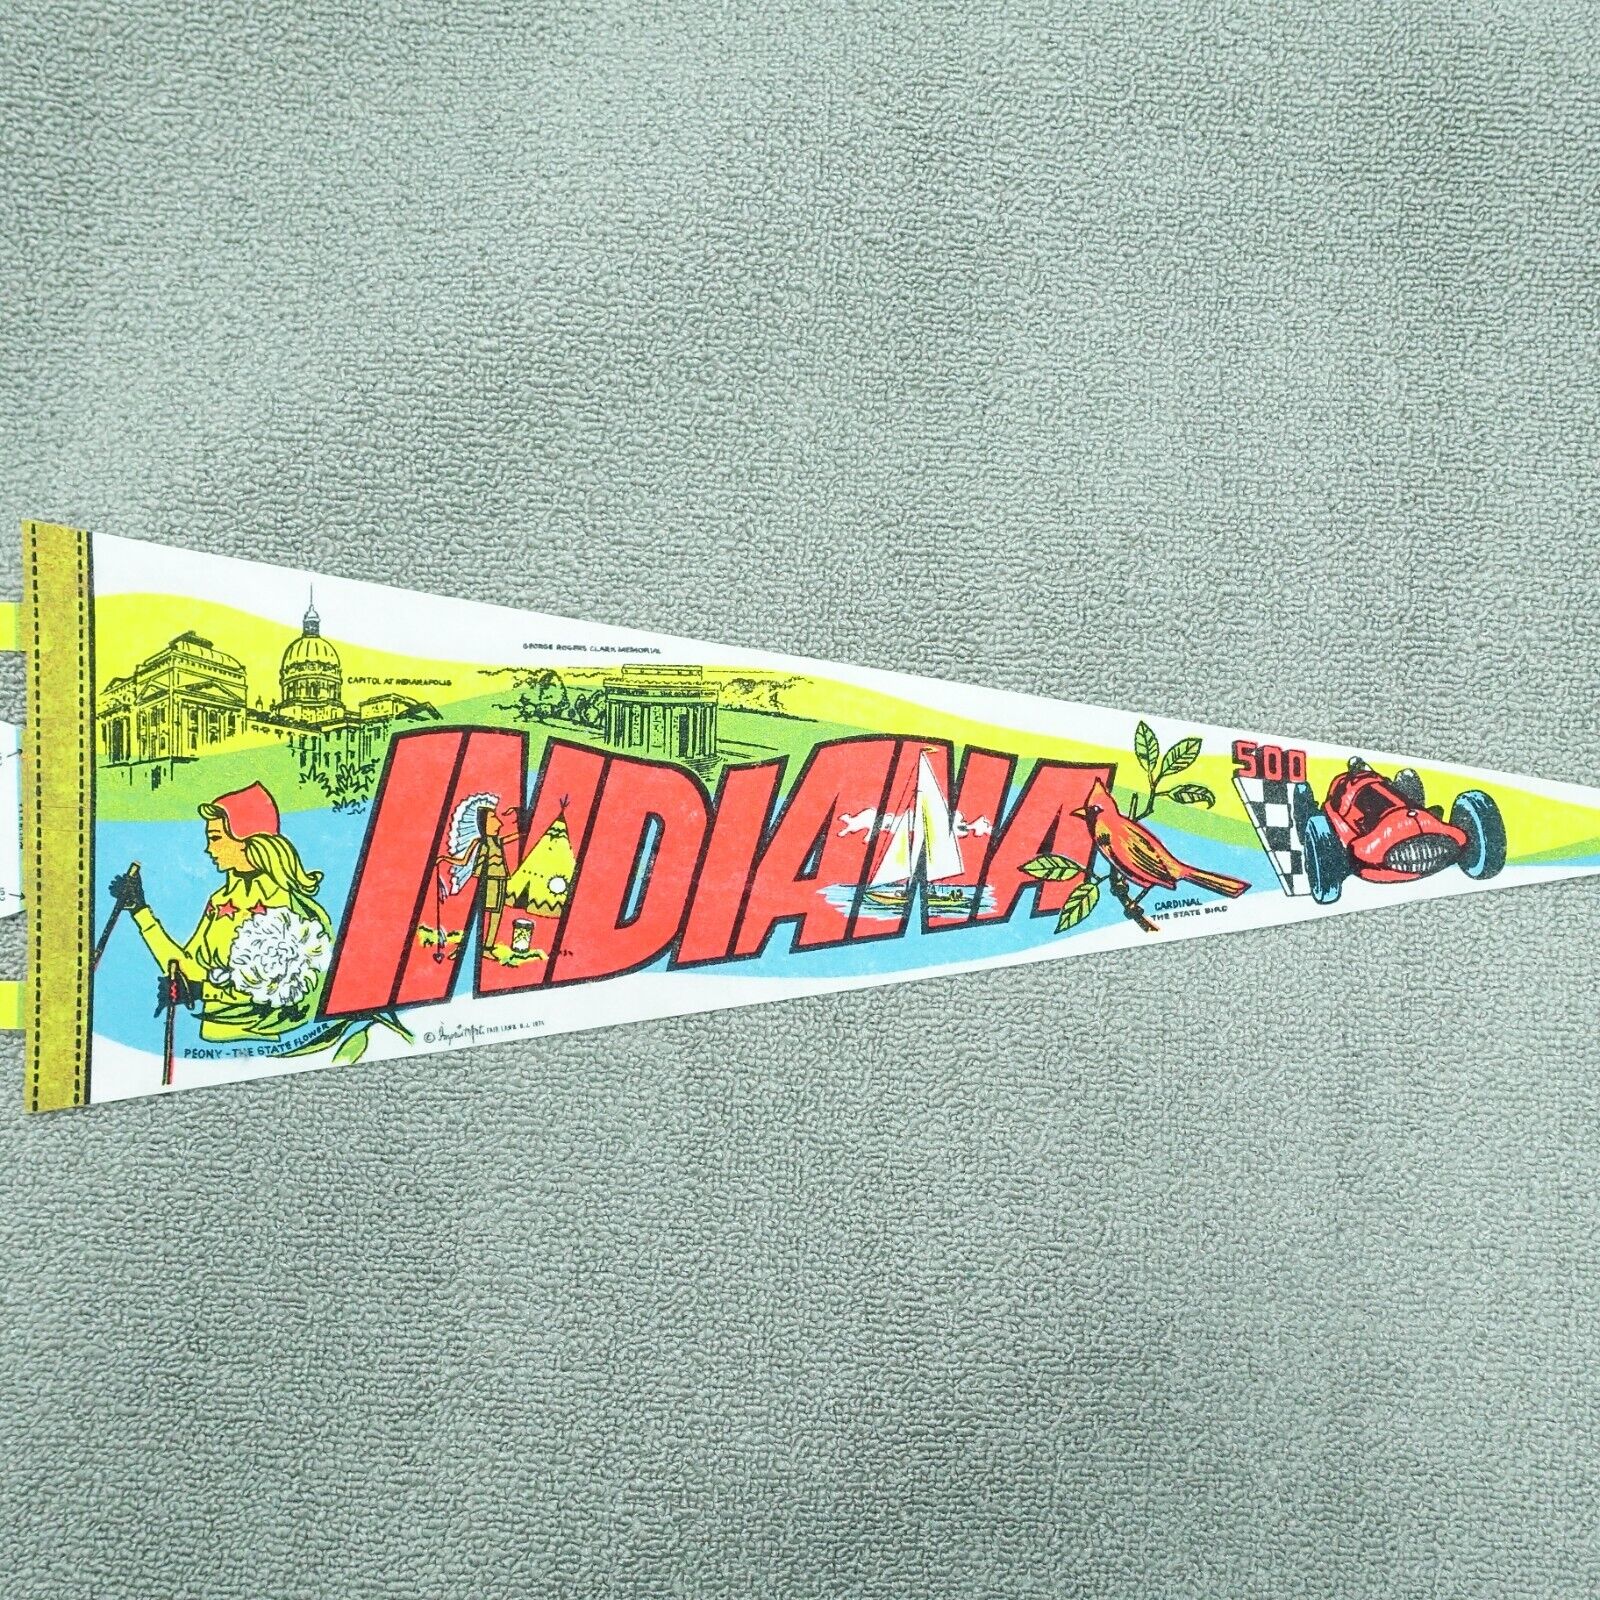 vintage 1974 souvenir pennant indiana state capital indy 500 cardinal colorful